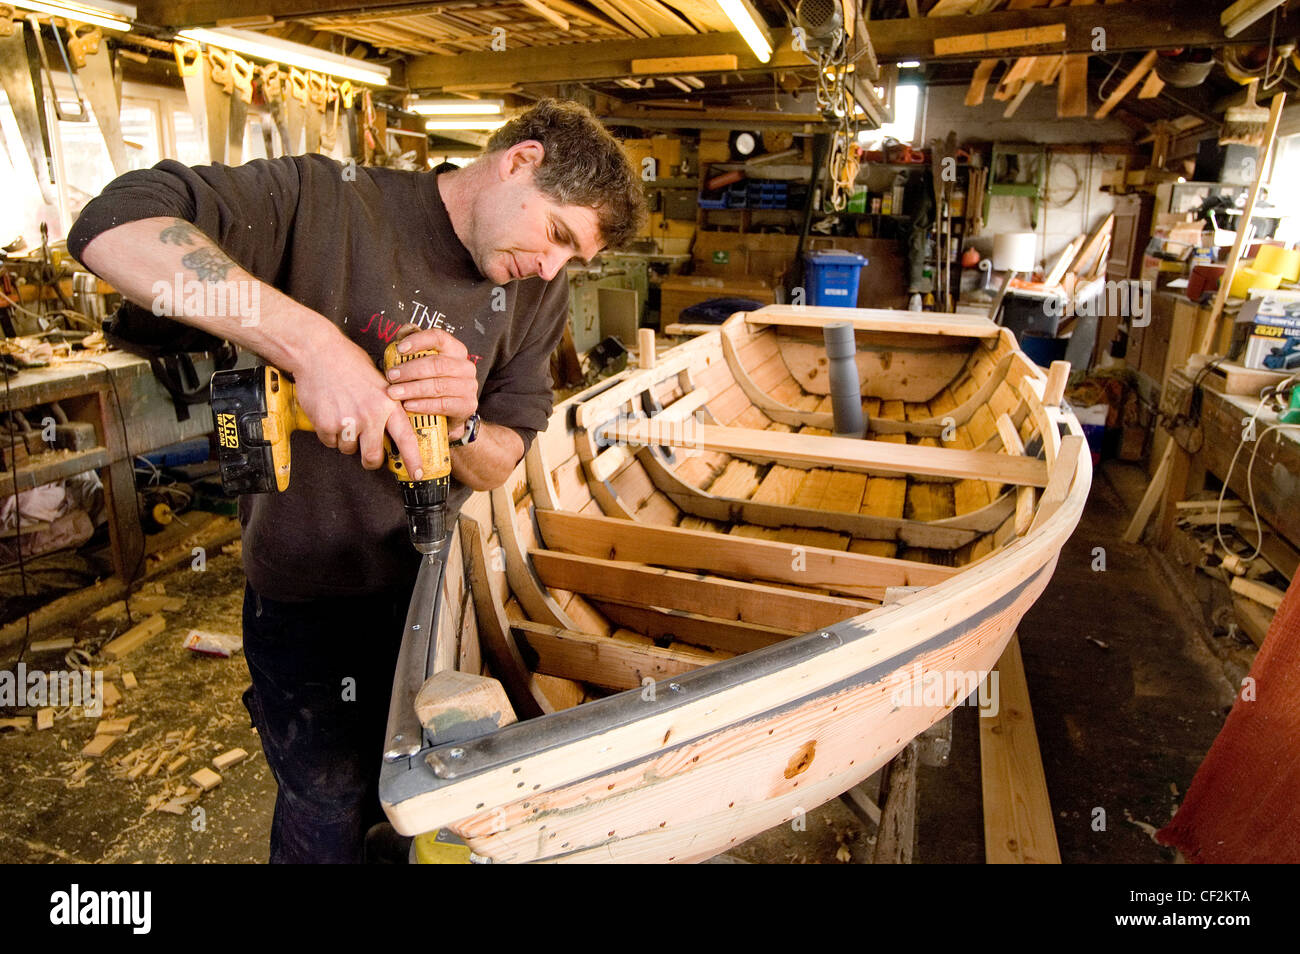 Traditional boat building at Norham. Ian Simpson the last builder of traditional boats on the River Tweed. Stock Photo